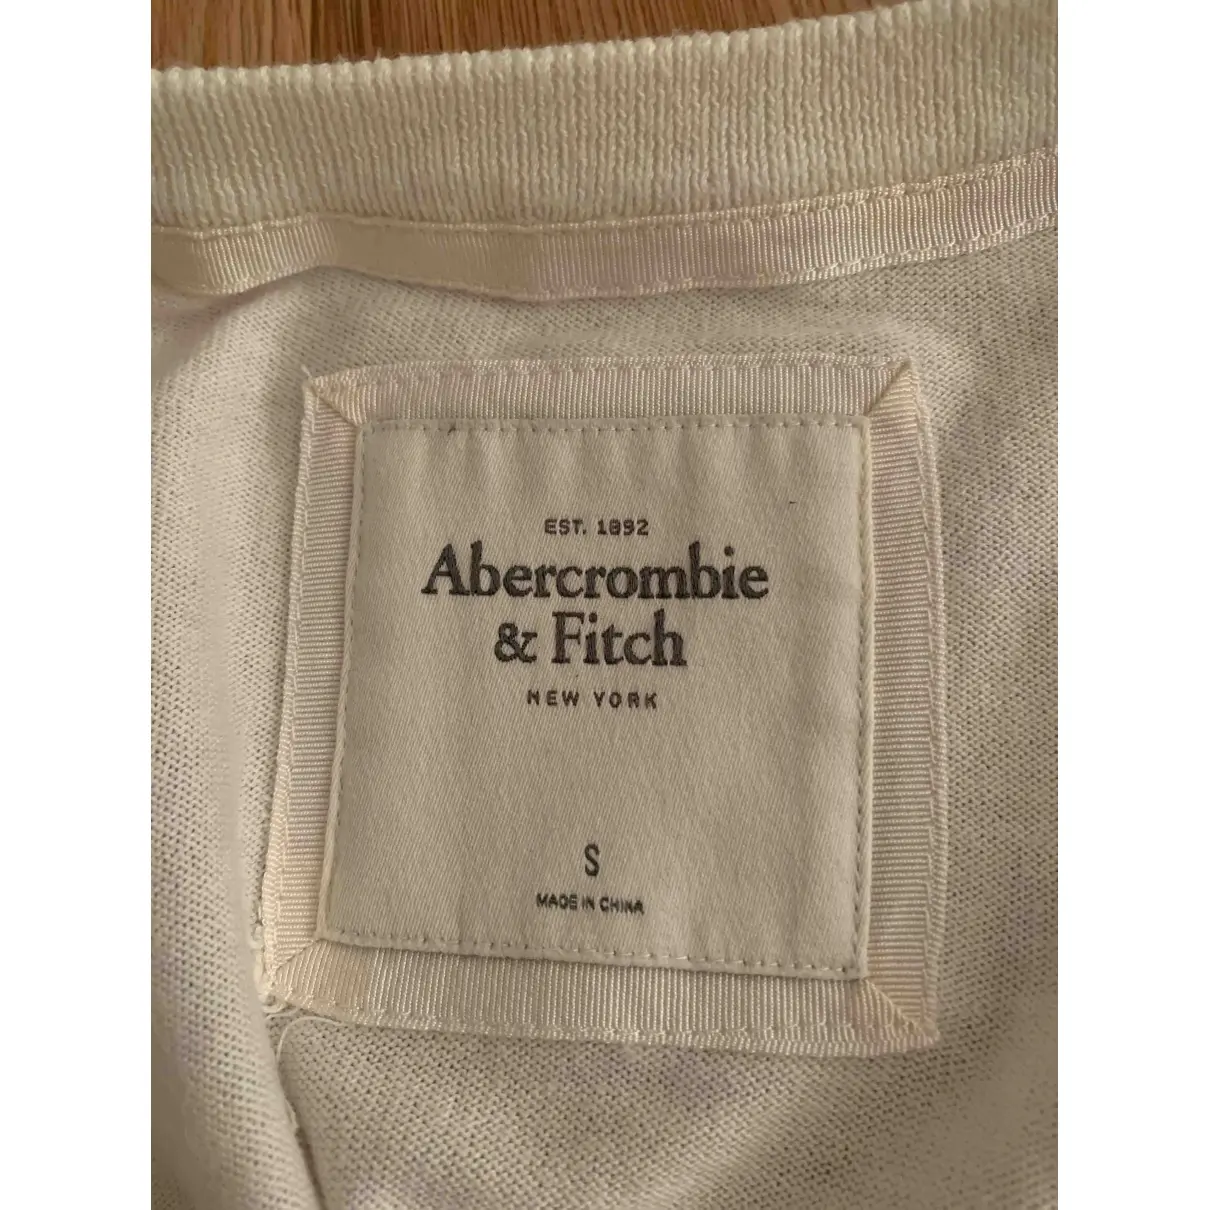 Buy Abercrombie & Fitch White Cotton Knitwear online